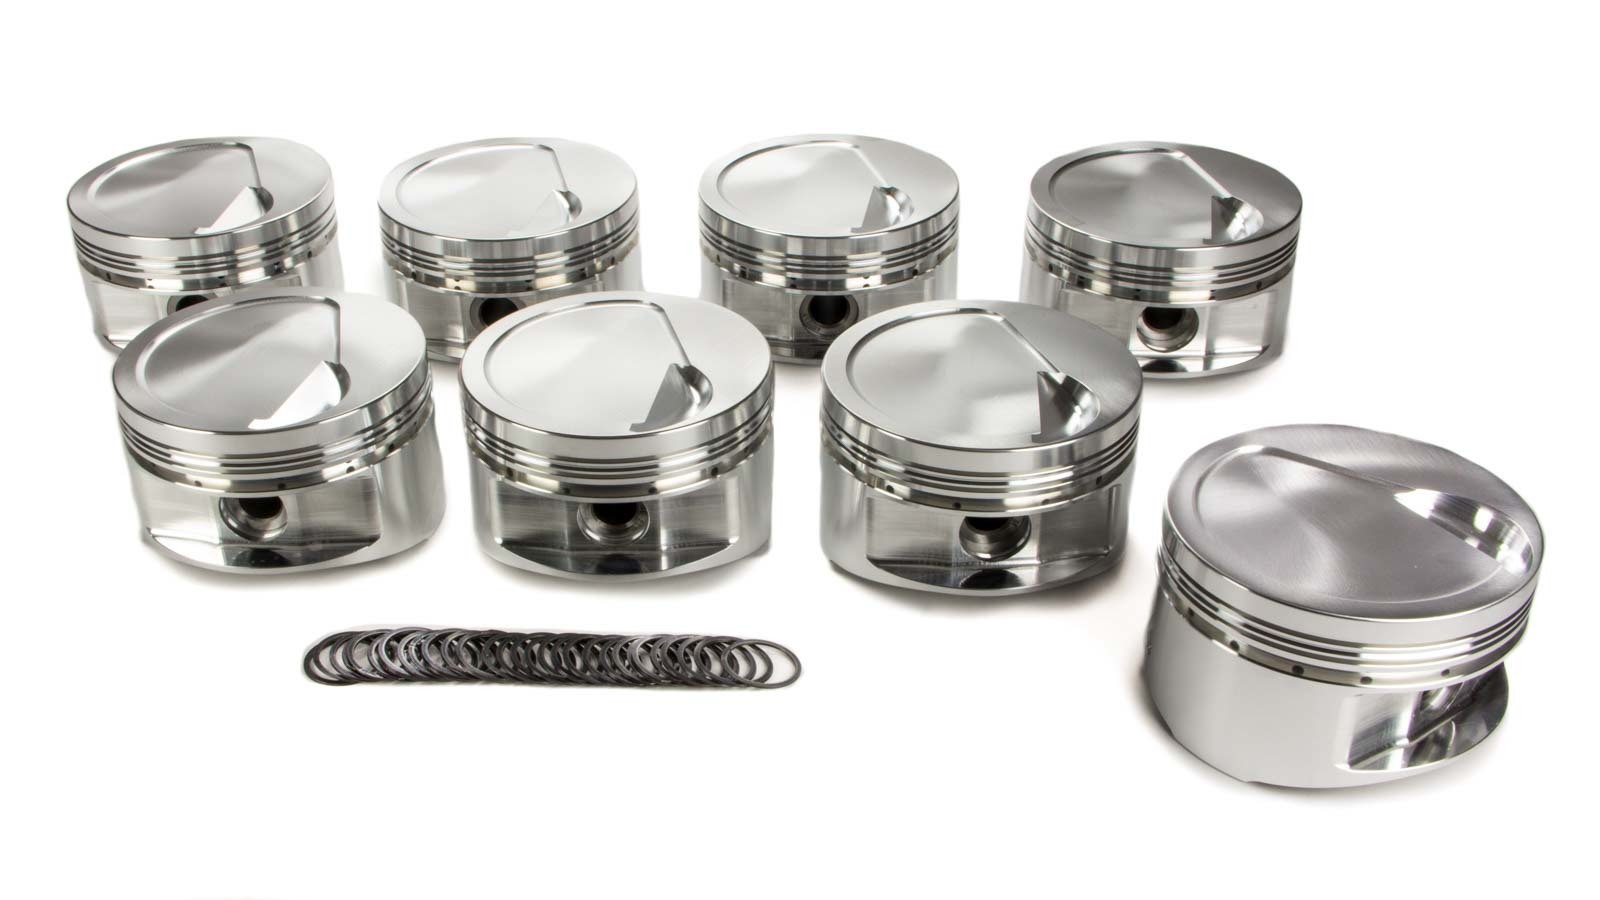 JE Pistons 257956 Piston, Big Block Inverted Dome, Forged, 4.500 in Bore, 1/16 x 1/16 x 3/16 in Ring Grooves, Minus 11.50 cc, Big Block Chevy, Set of 8